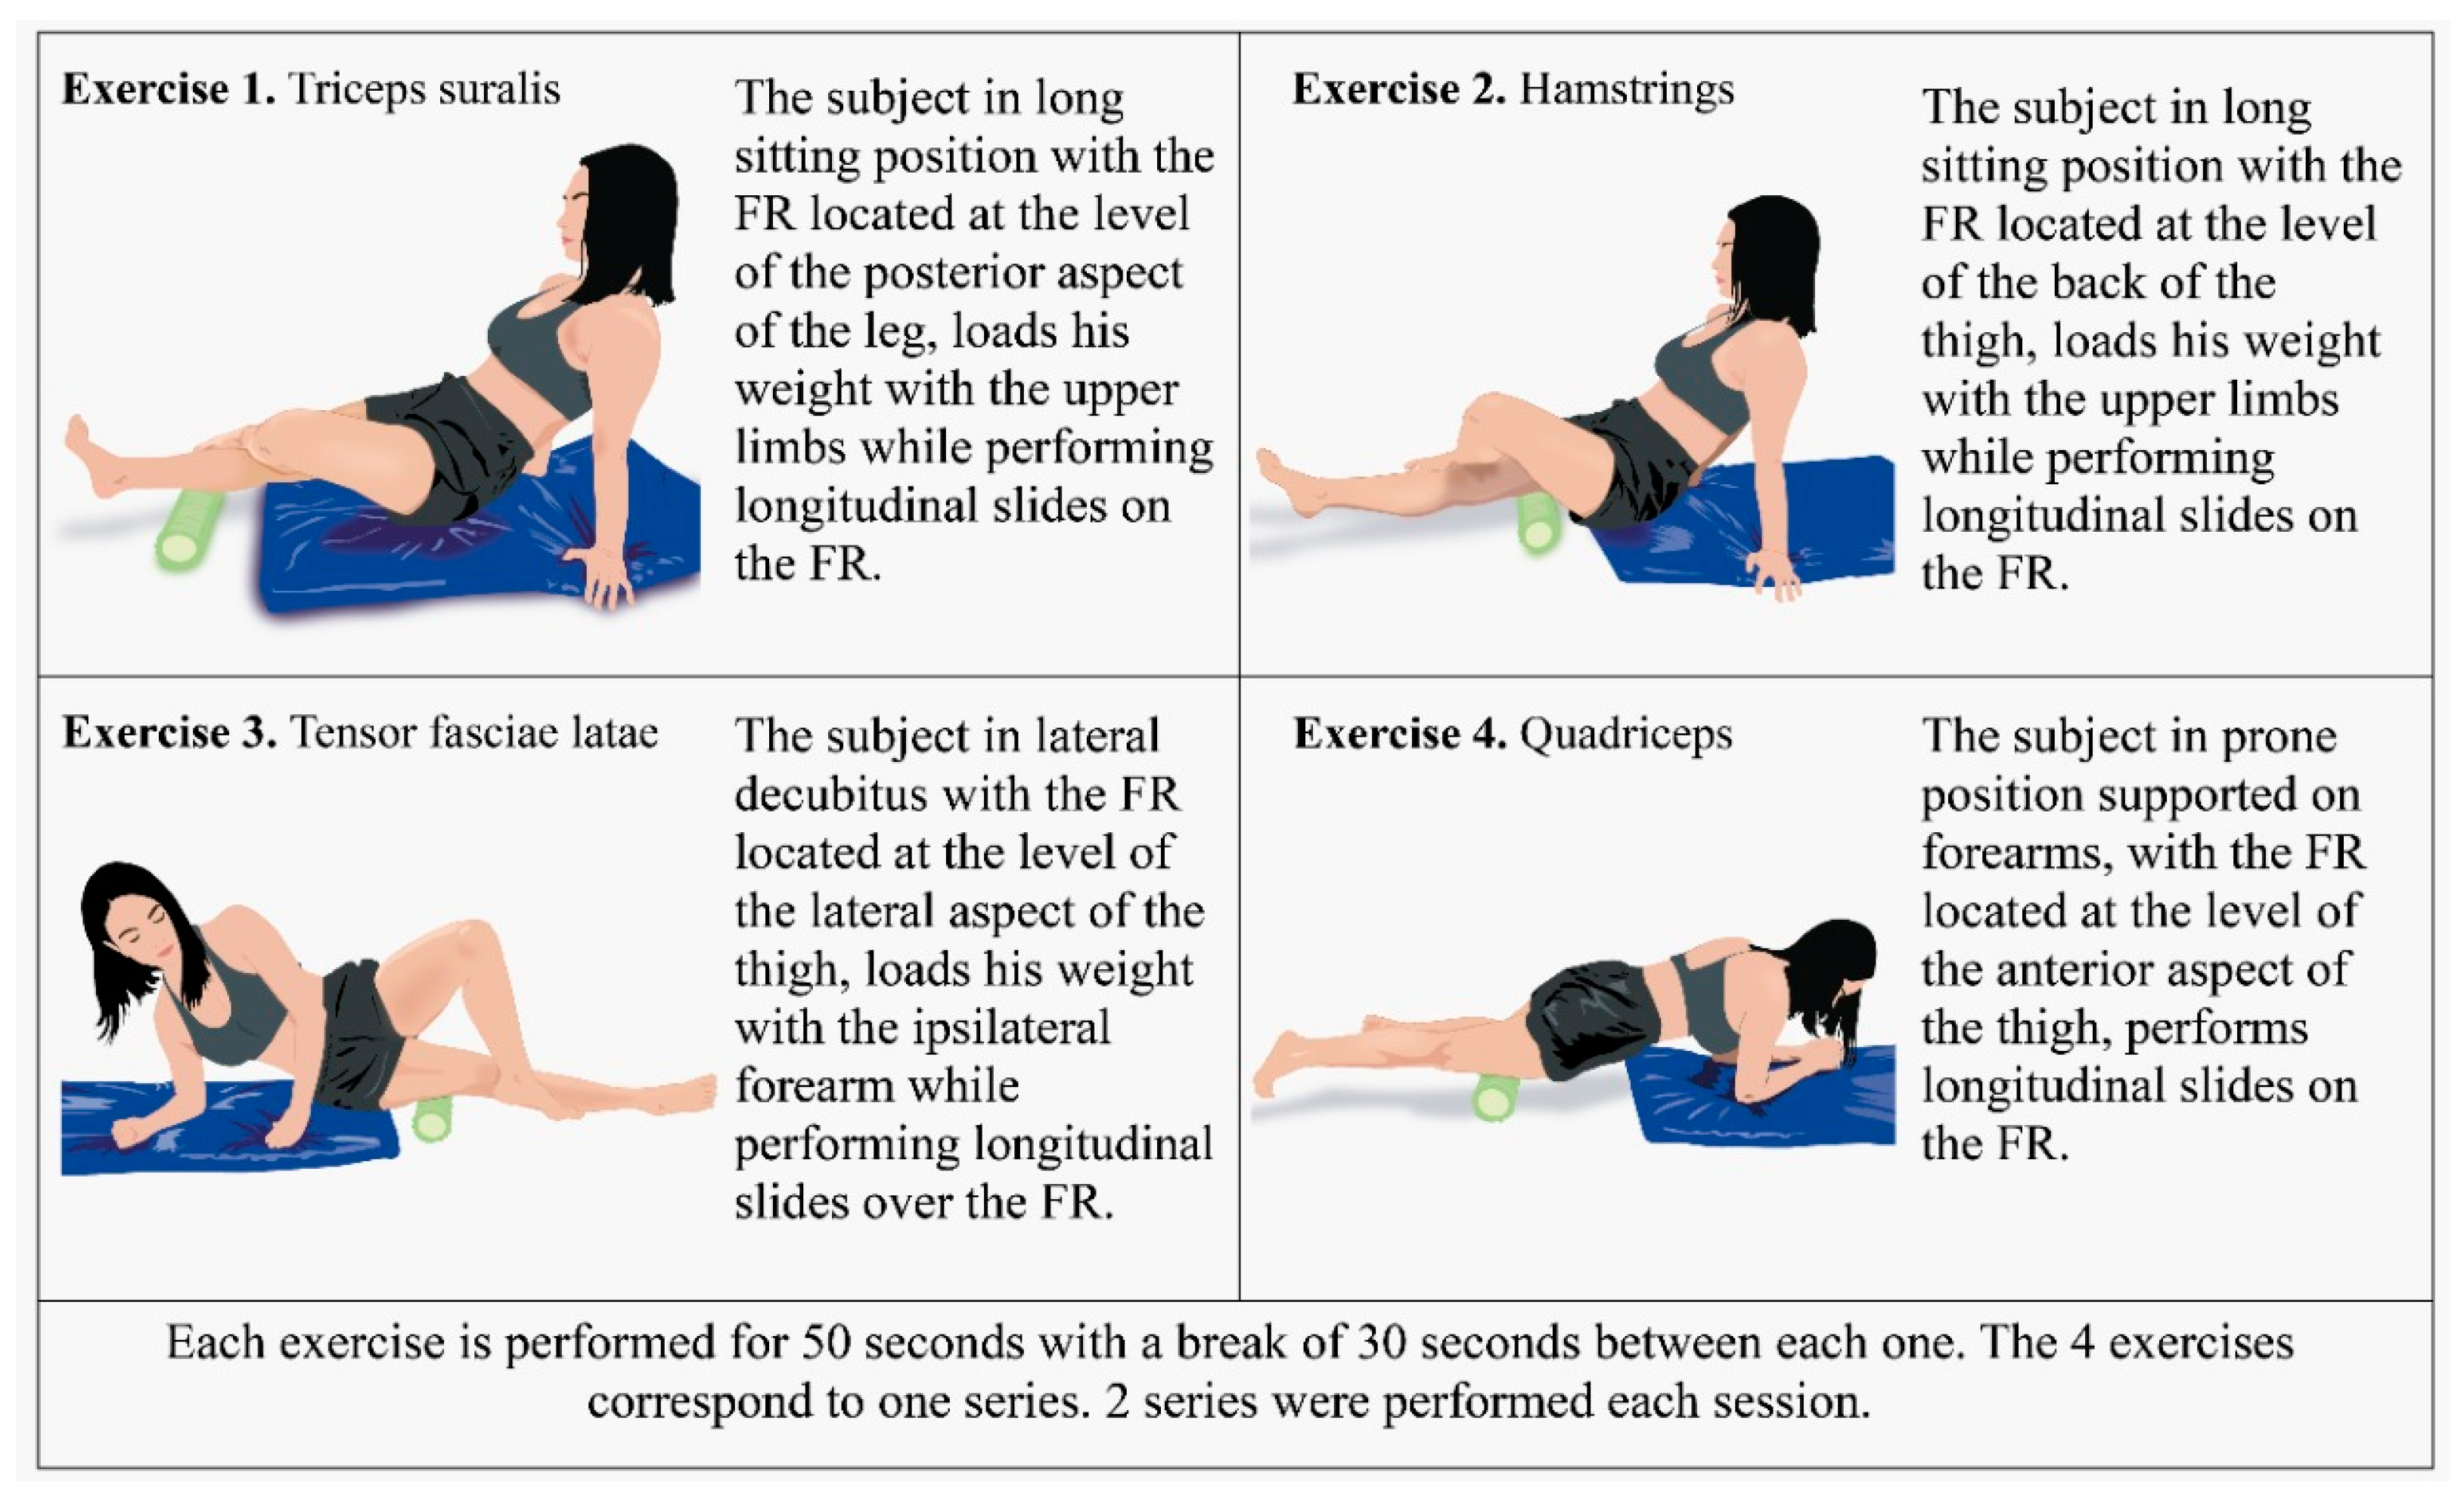 The Motion Segment of the Lumbar Spine - Academy of Clinical Massage